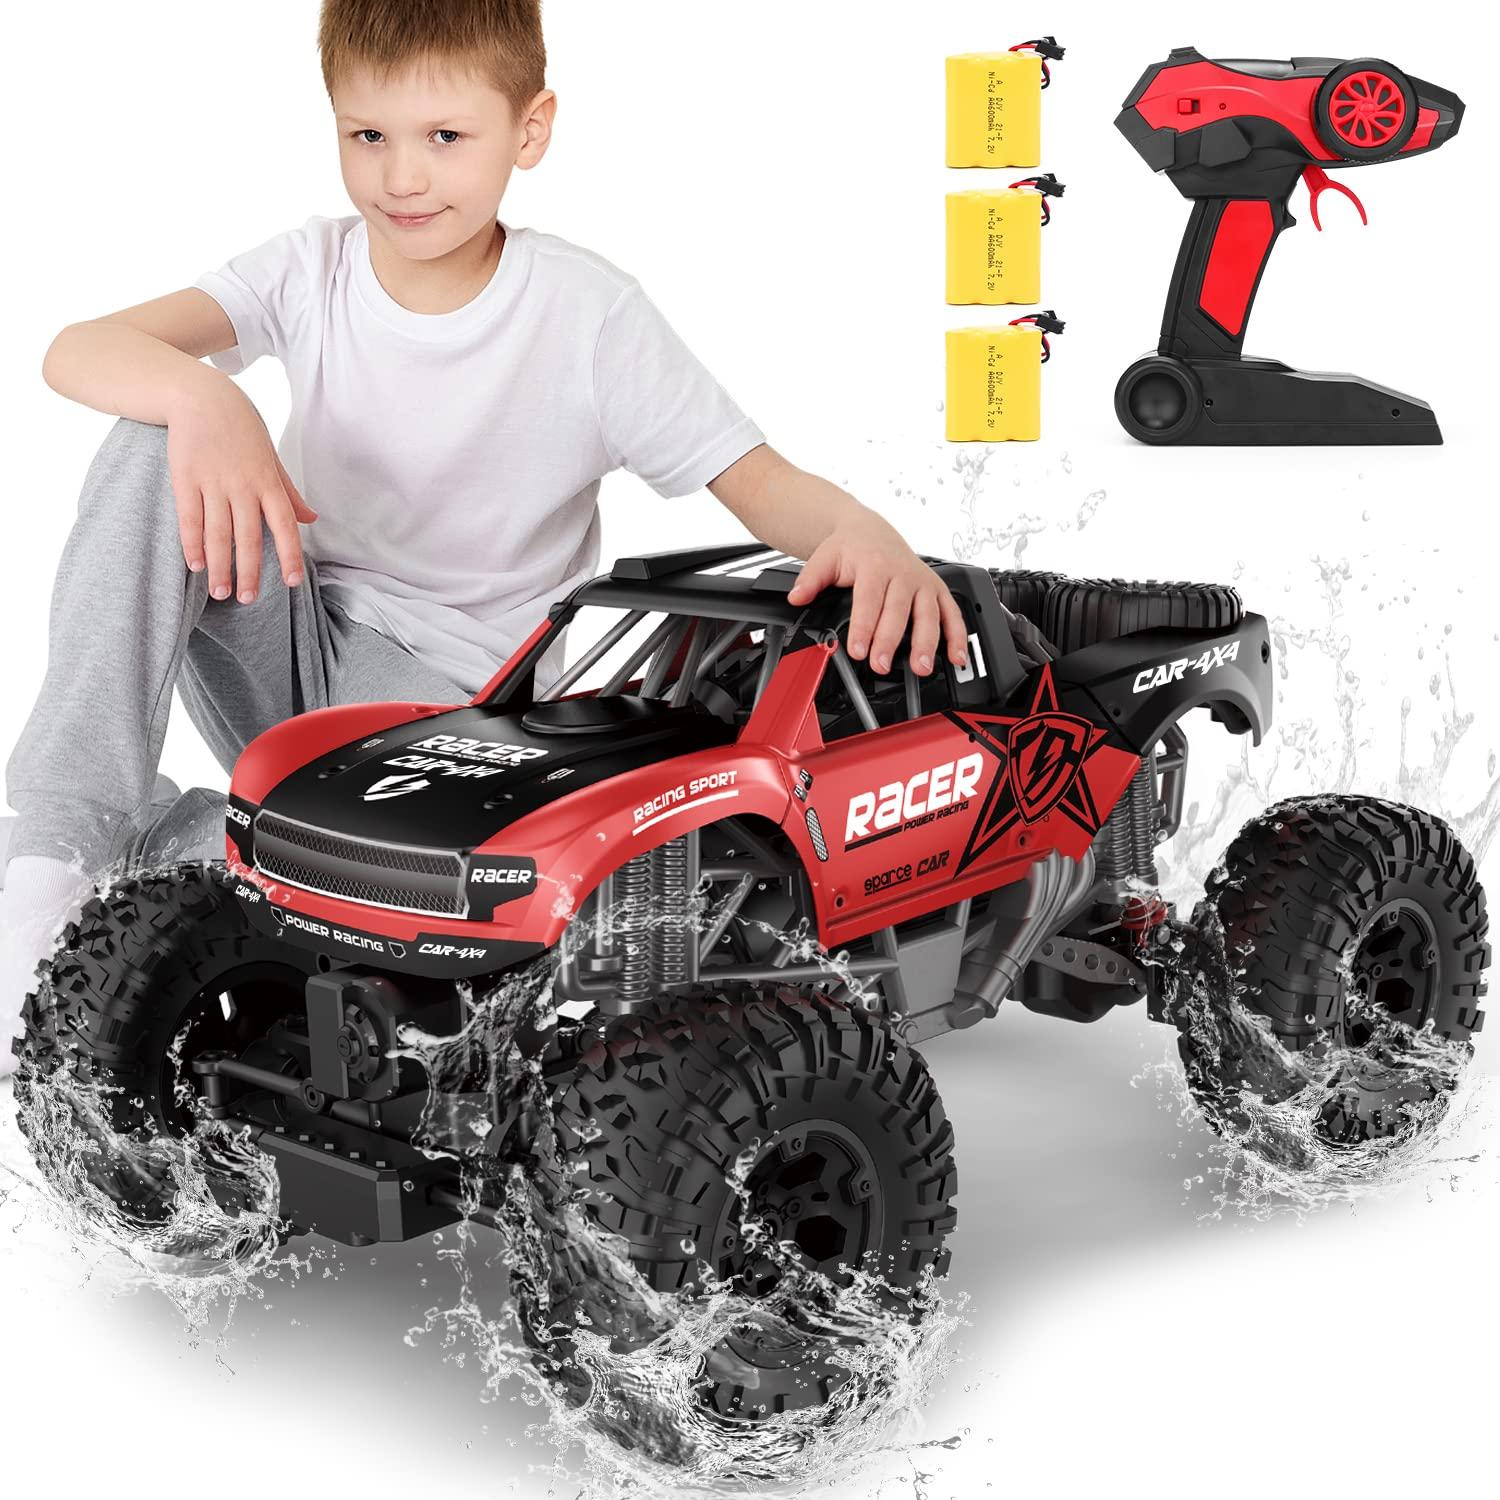 Gas Powered Rc Monster Truck: Considerations for Choosing a Gas-Powered RC Monster Truck